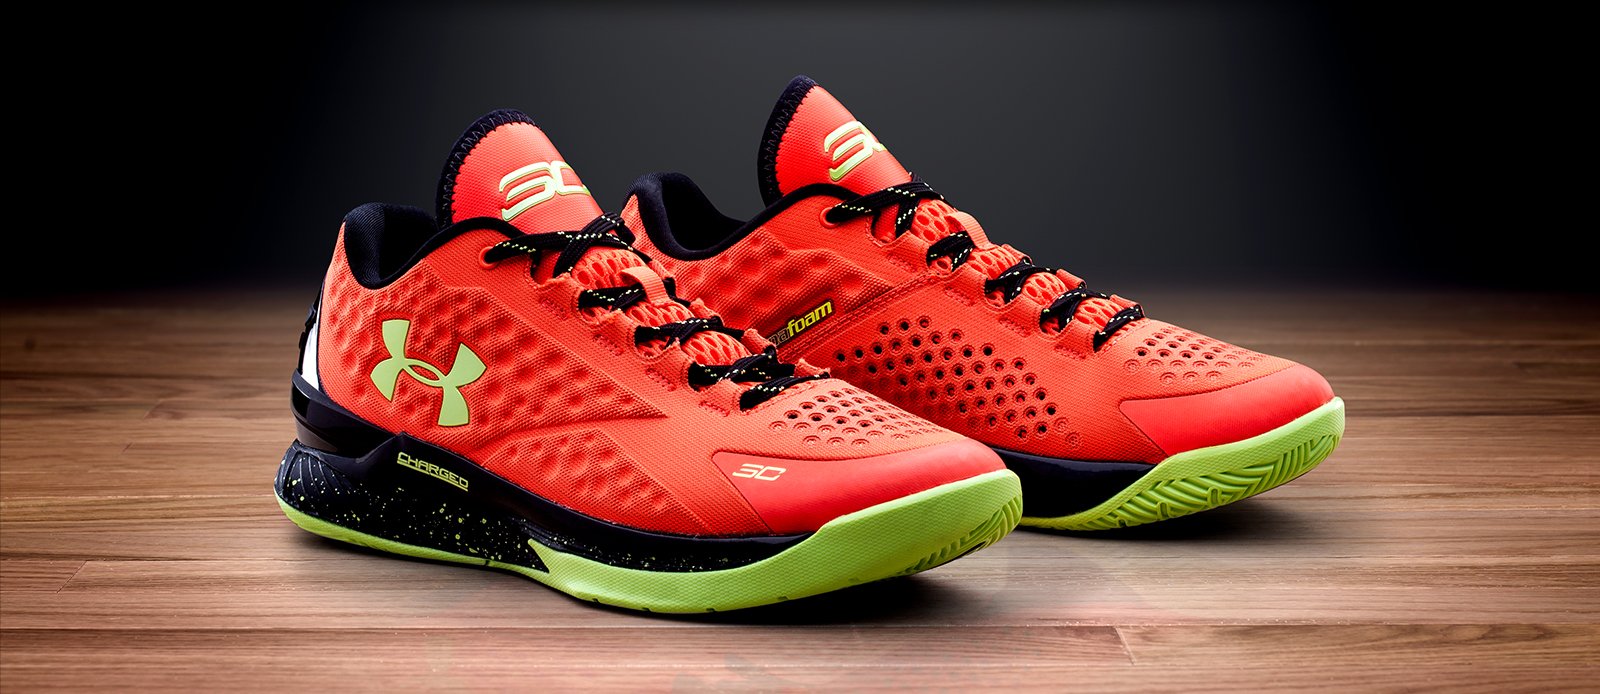 curry one low